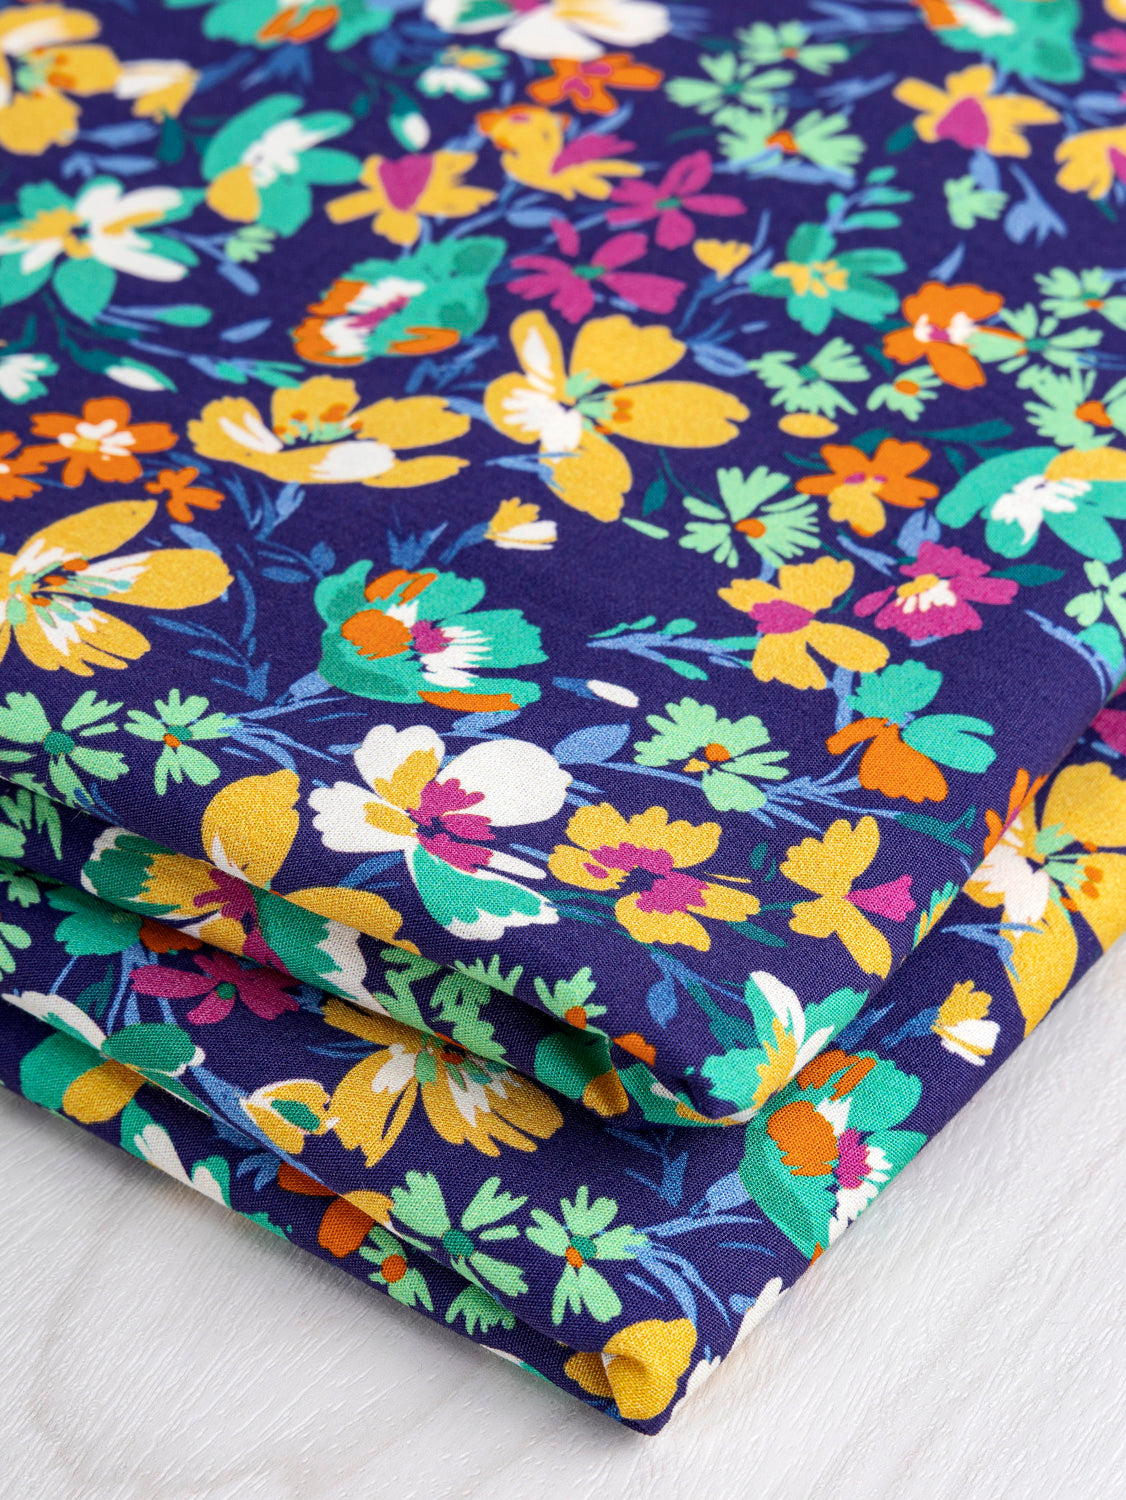 Buy fabric online - Printed Cotton - Printed Fabric - Embellished